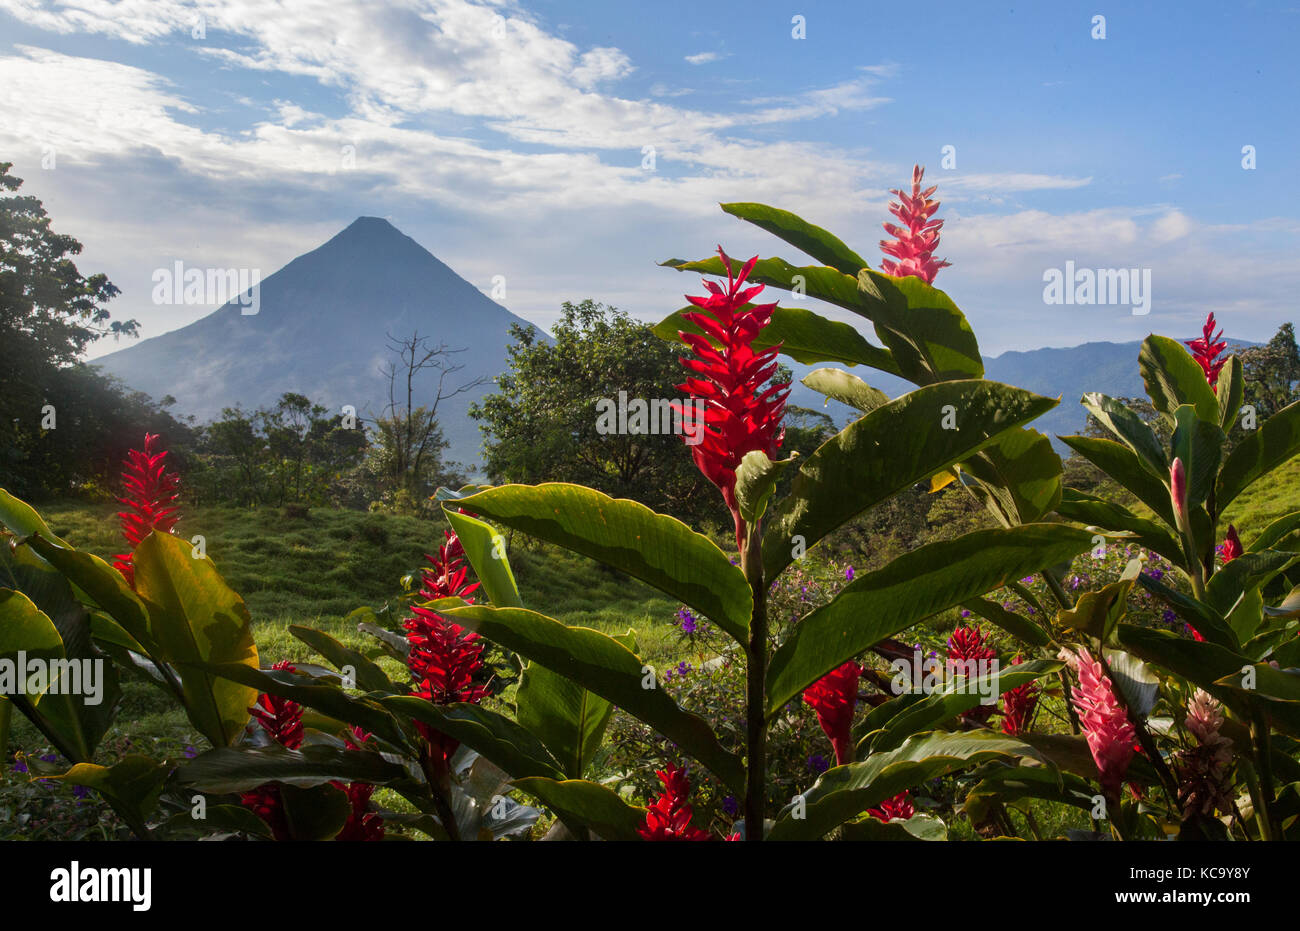 Arenal Volcano in Costa Rica with tropical flowers Stock Photo